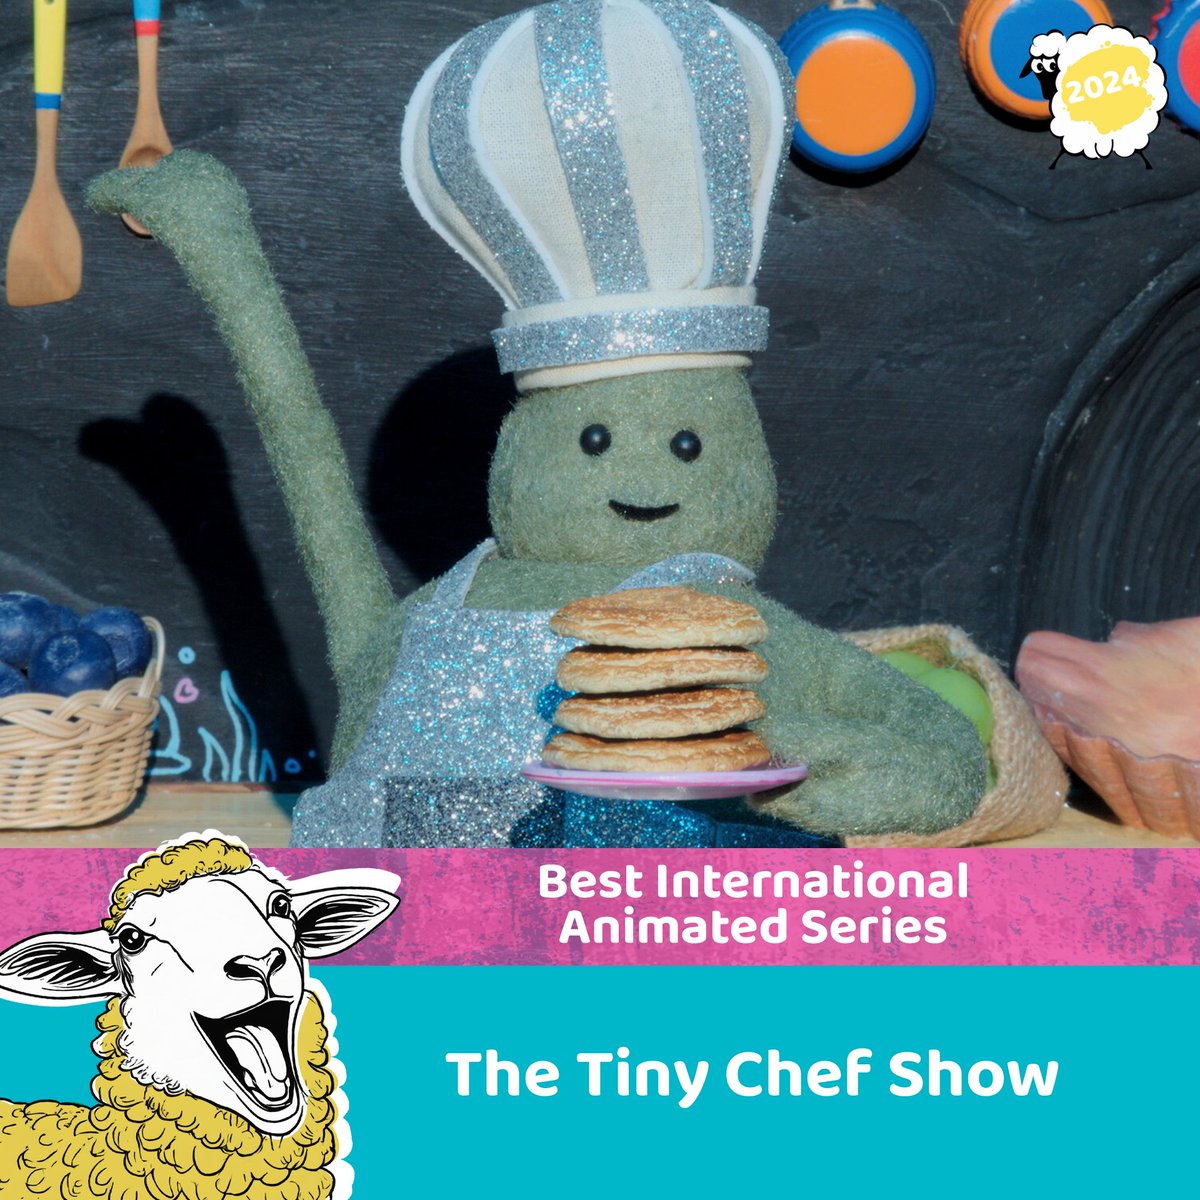 We’re overjoyed to award The Tiny Chef Show - Best International Animated Series! #BAA24